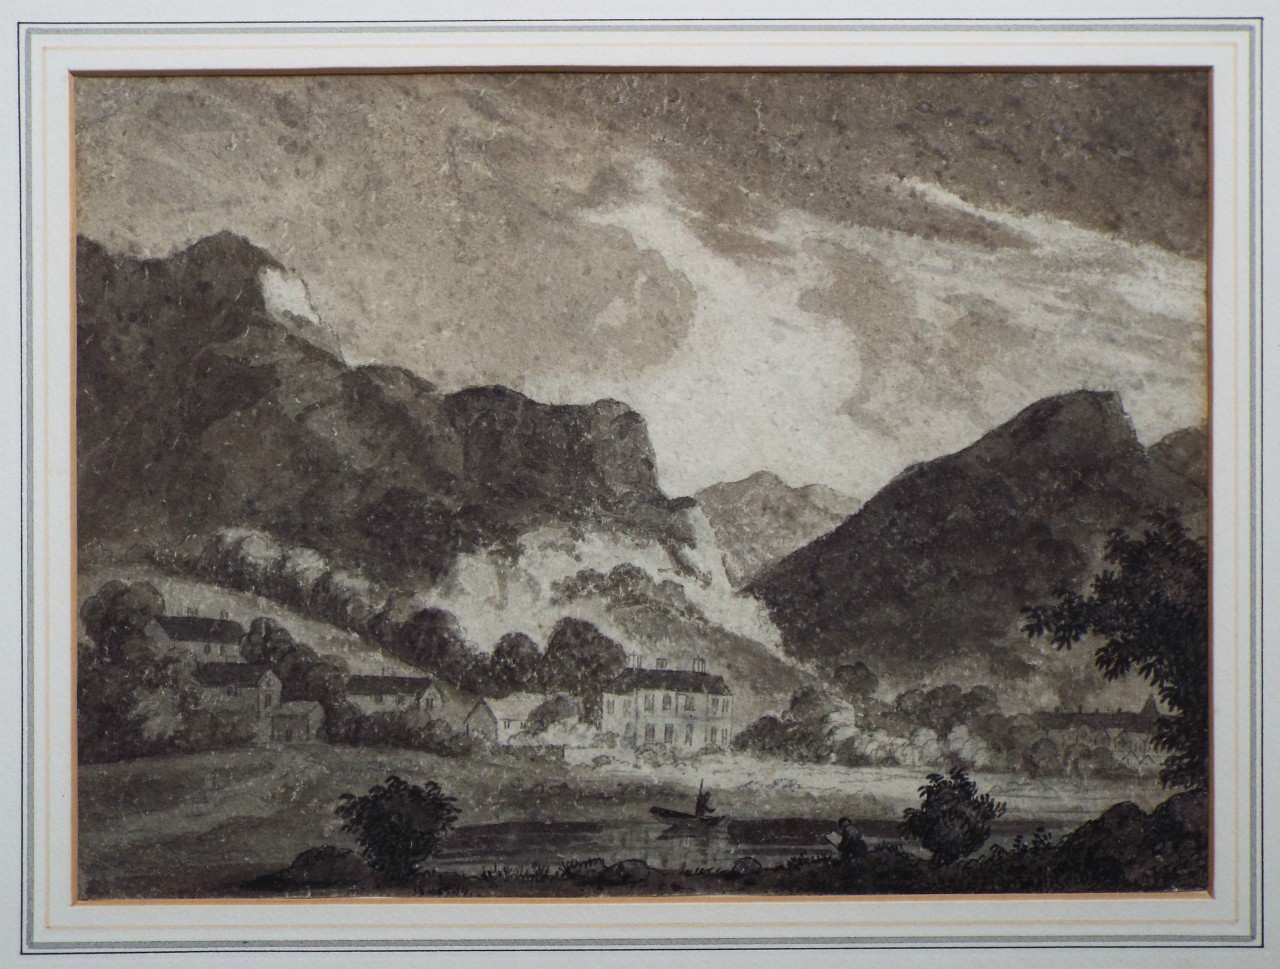 Pencil drawing - Lakeland landscape with mansion